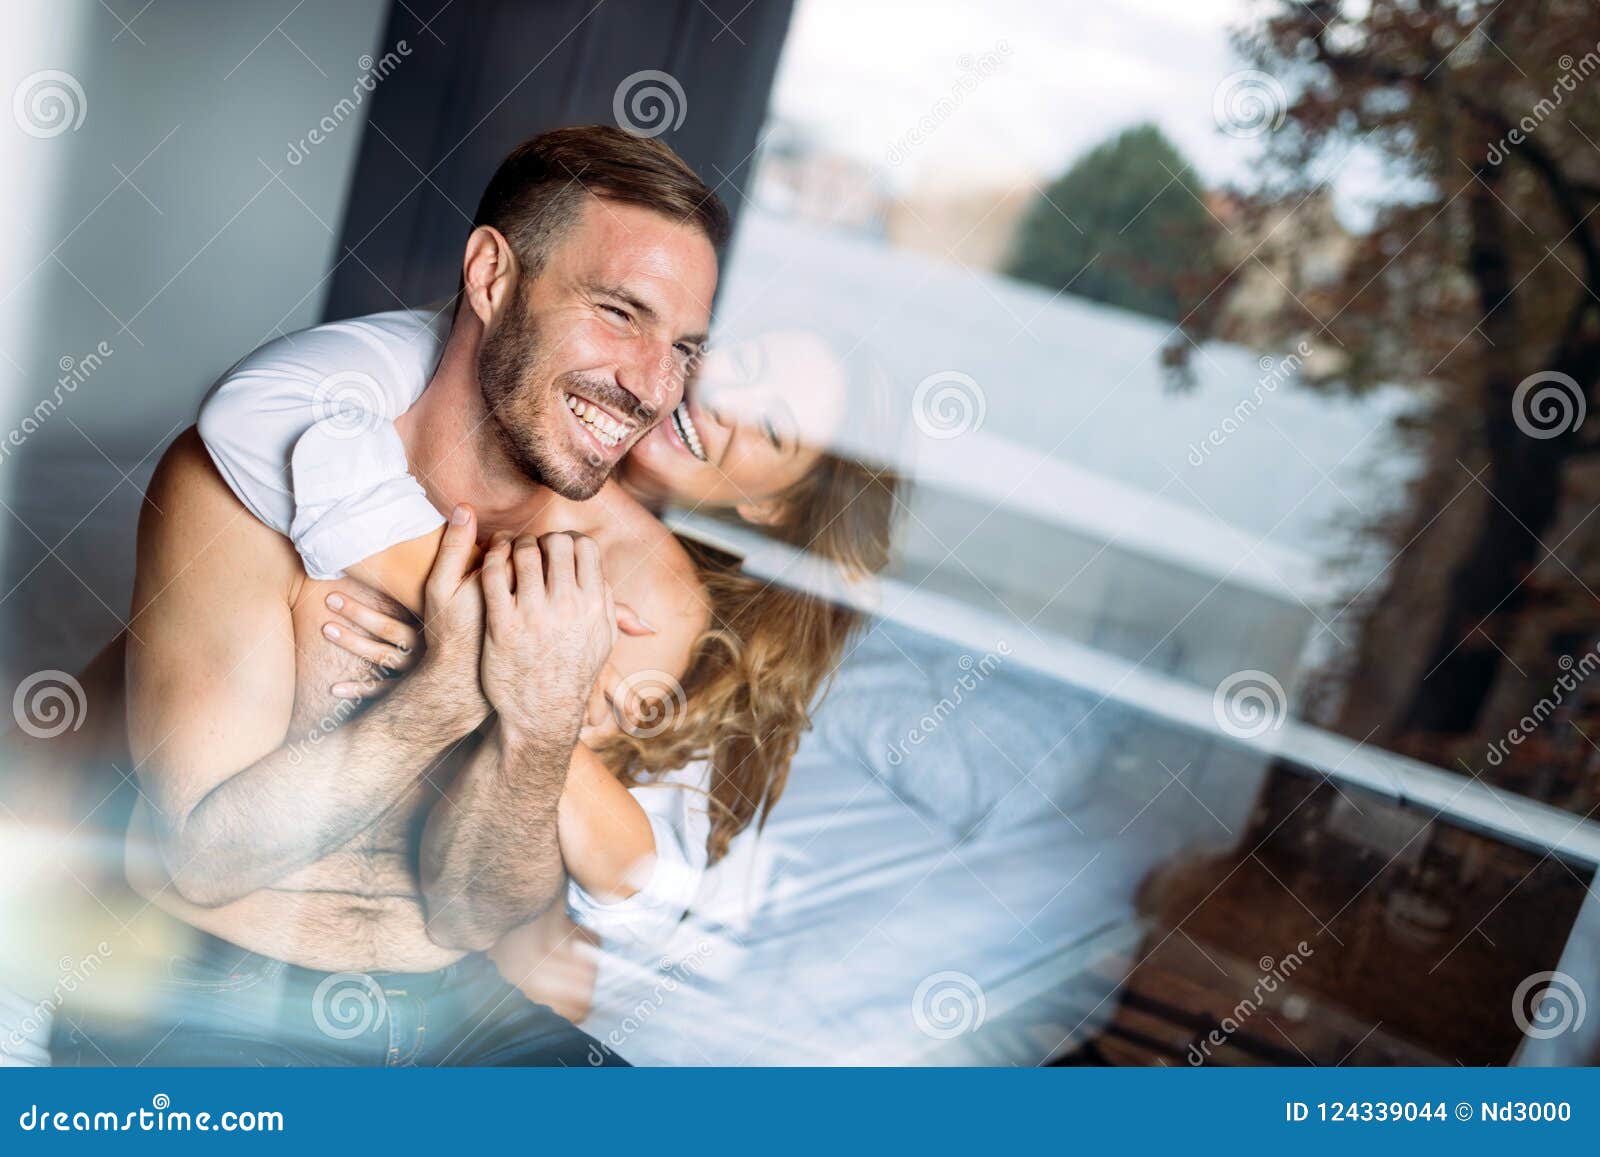 Couple Having Sex. Back View Of Woman In Black Panties Holding Her Bra  While Man Is Lying On Bed Stock Photo, Picture and Royalty Free Image.  Image 83690965.